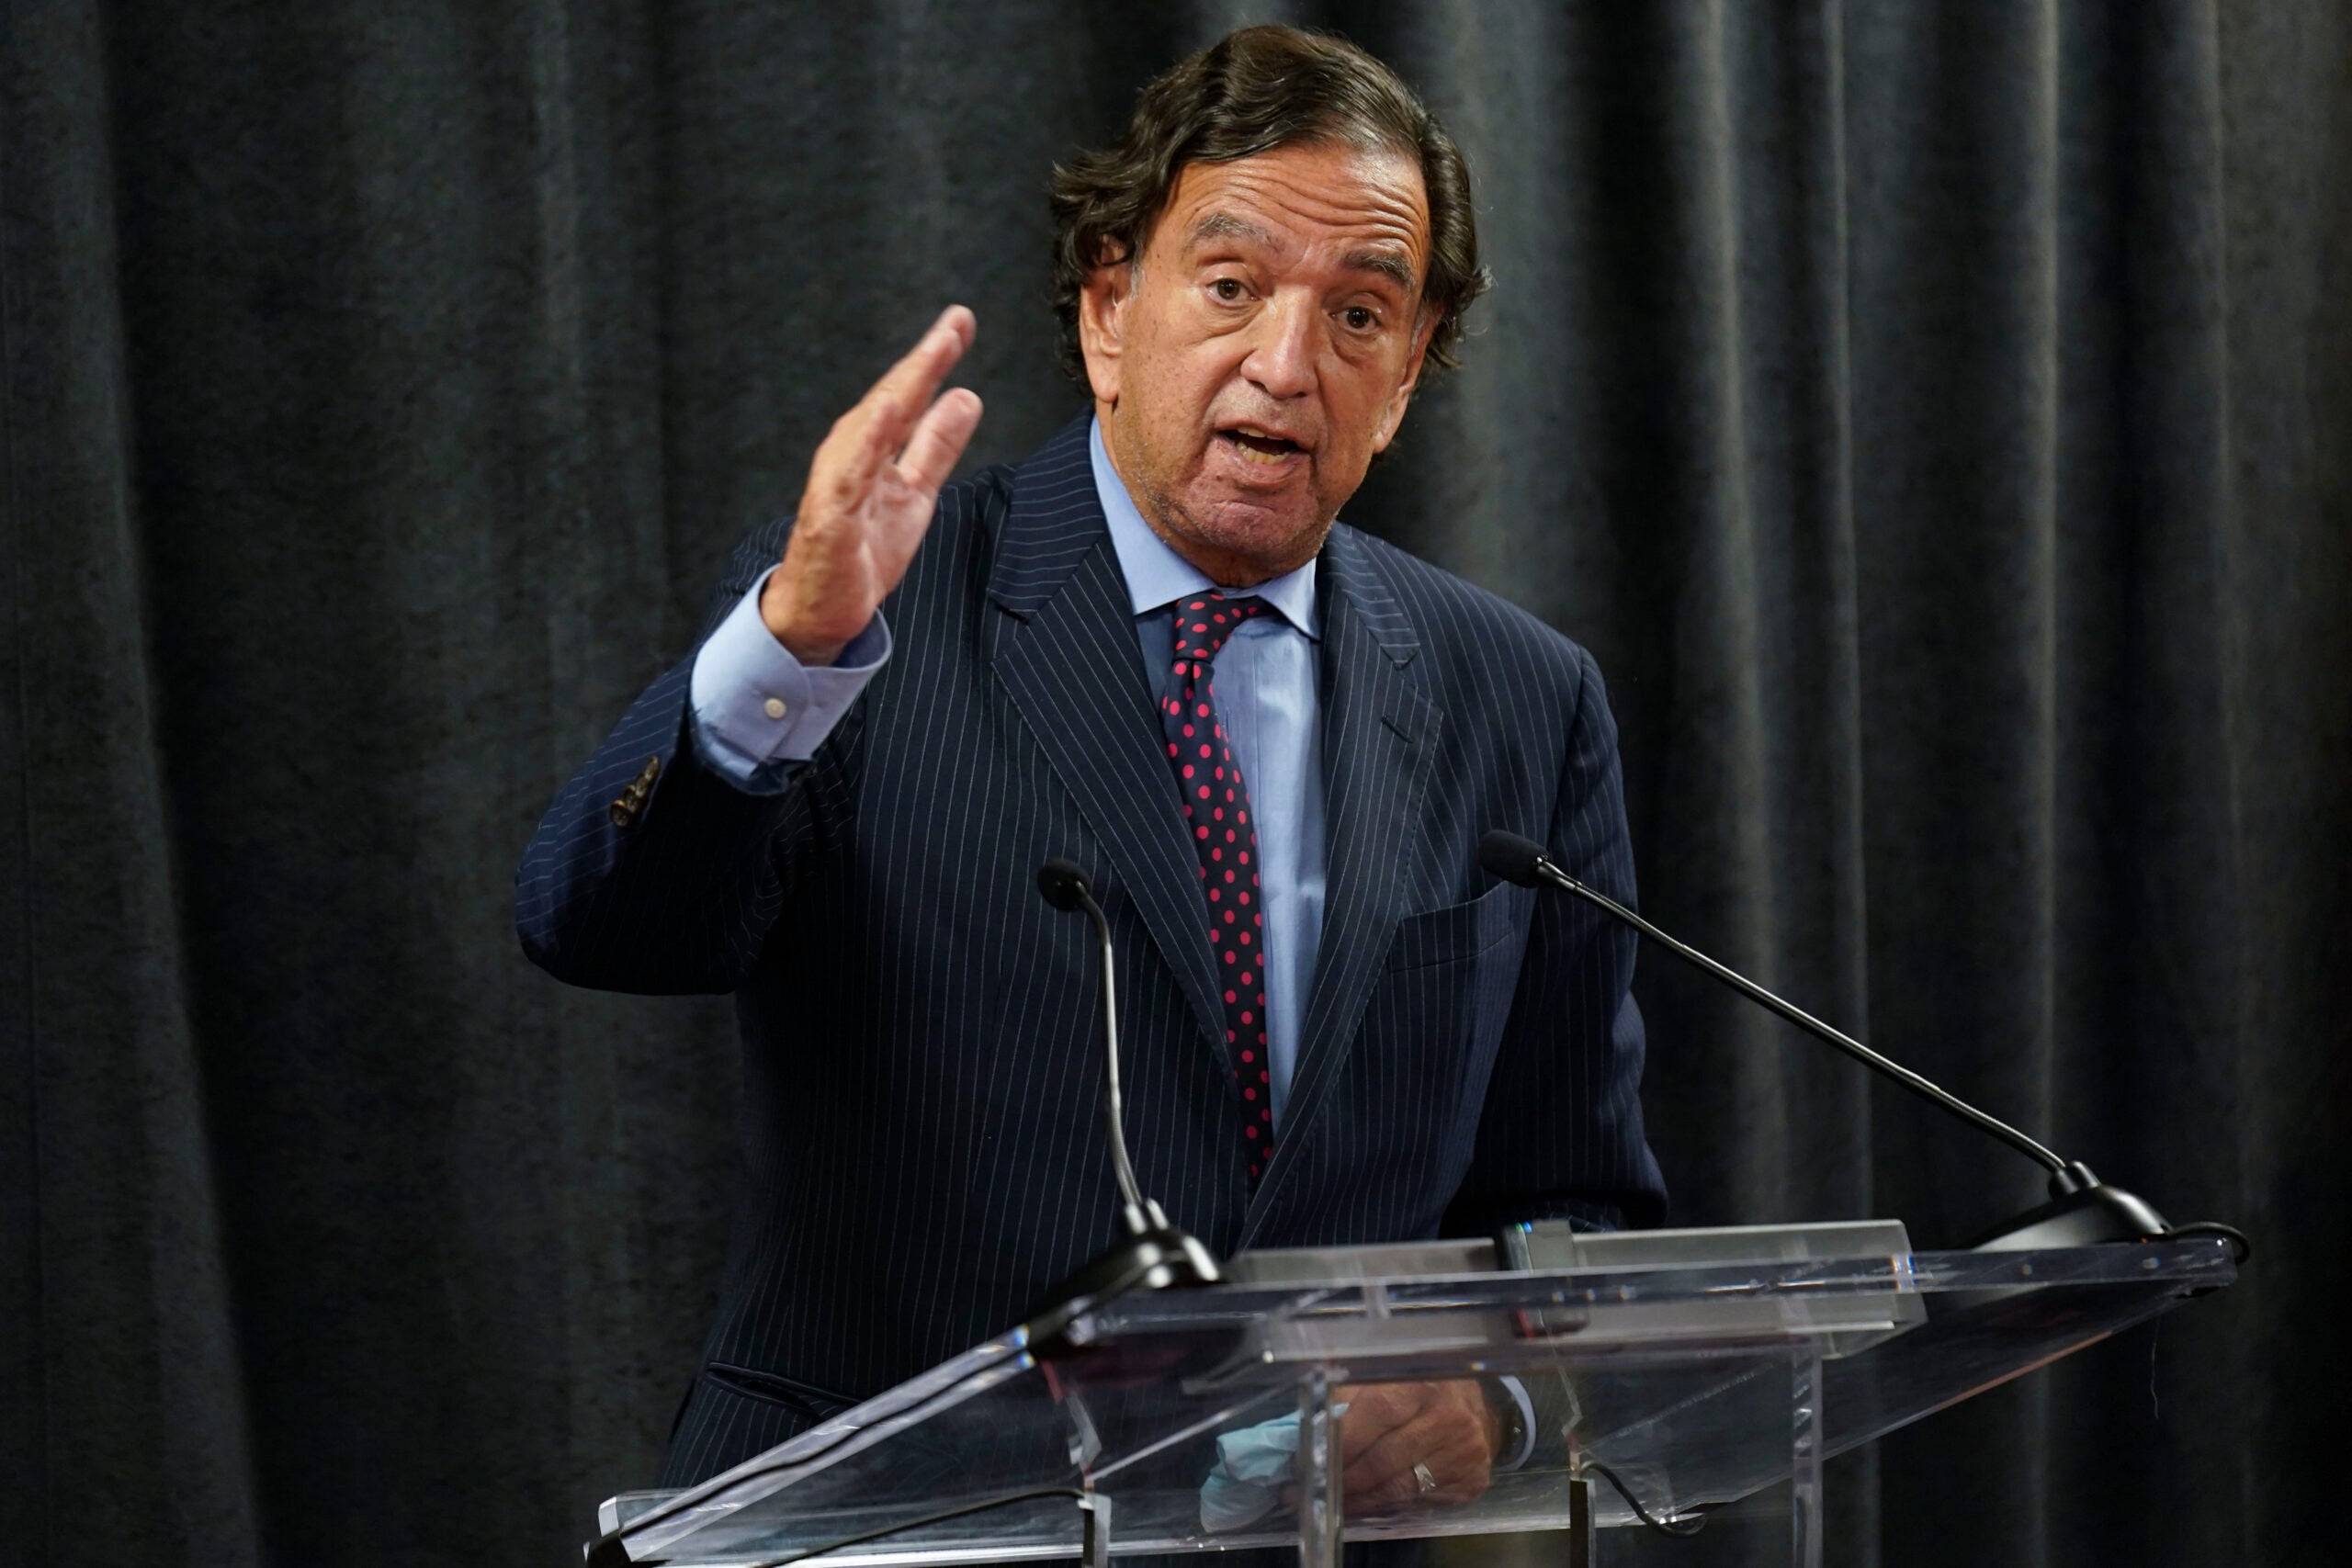 Former U.S. diplomat Bill Richardson speaks to reporters during a news conference in New York, Tuesday, Nov. 16, 2021.